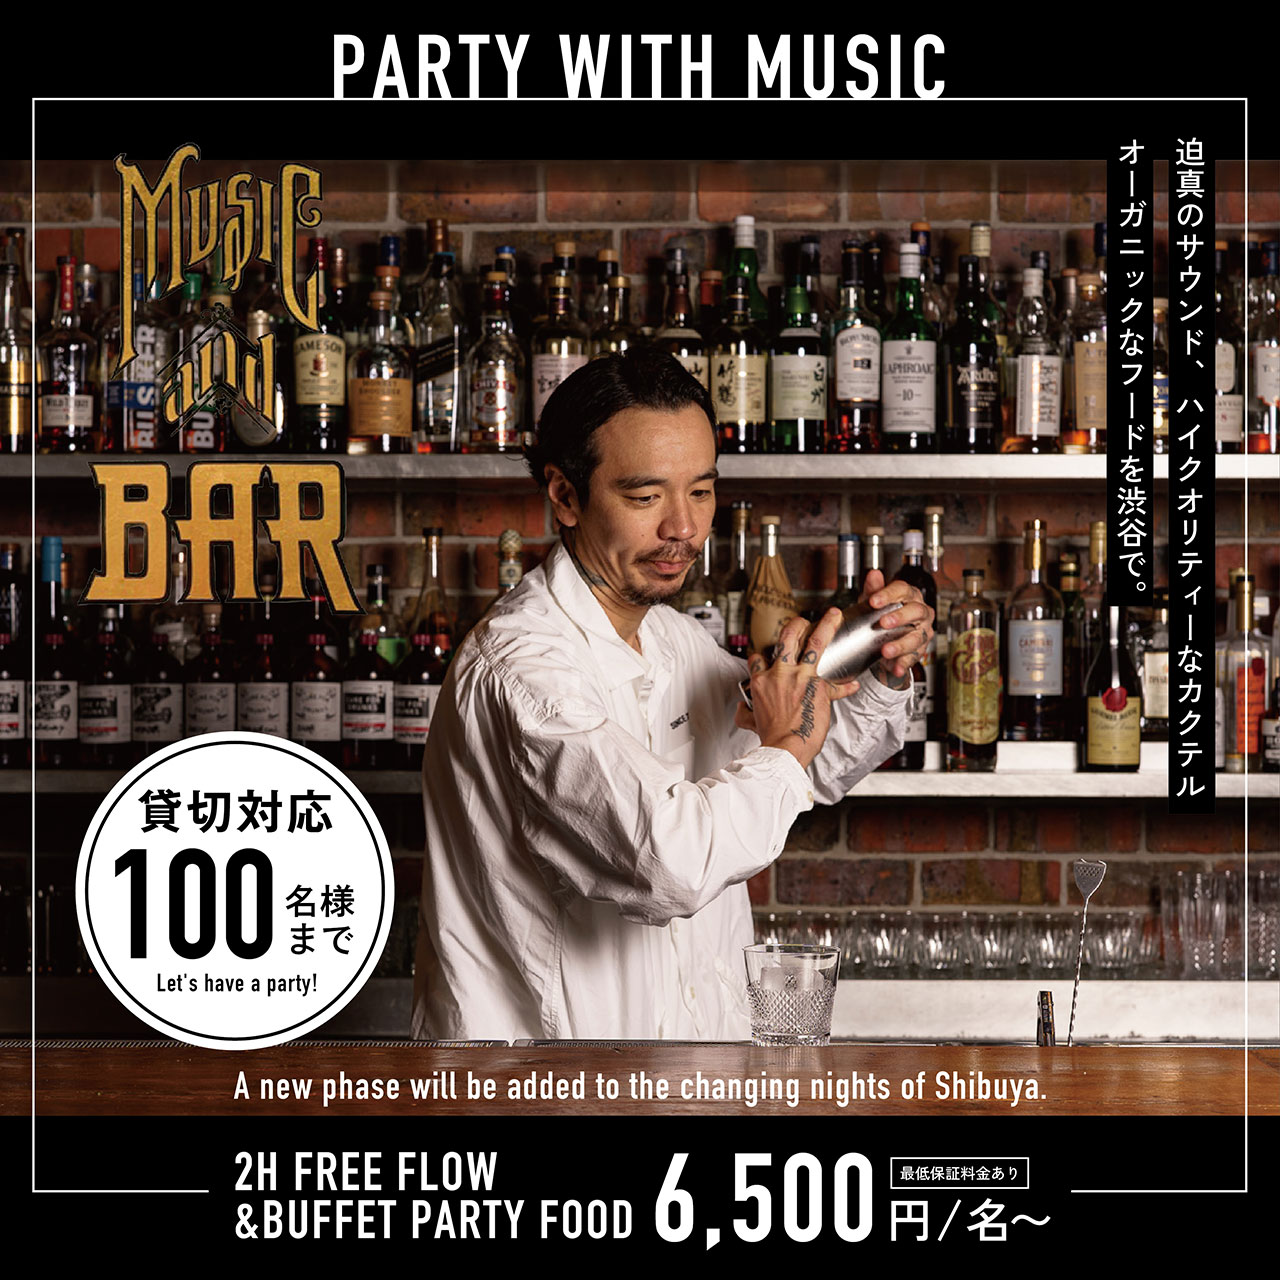 PARTY WITH MUSIC　迫真のサウンド、ハイクオリティーなカクテル オーガニックなフードを渋谷で。 貸切対応100名様まで Let's hava a party!　A new phase will be added to the changing nights of Shibuya　2H FREE FLOW &BUFFET PARTY FOOD 6,500円／名～